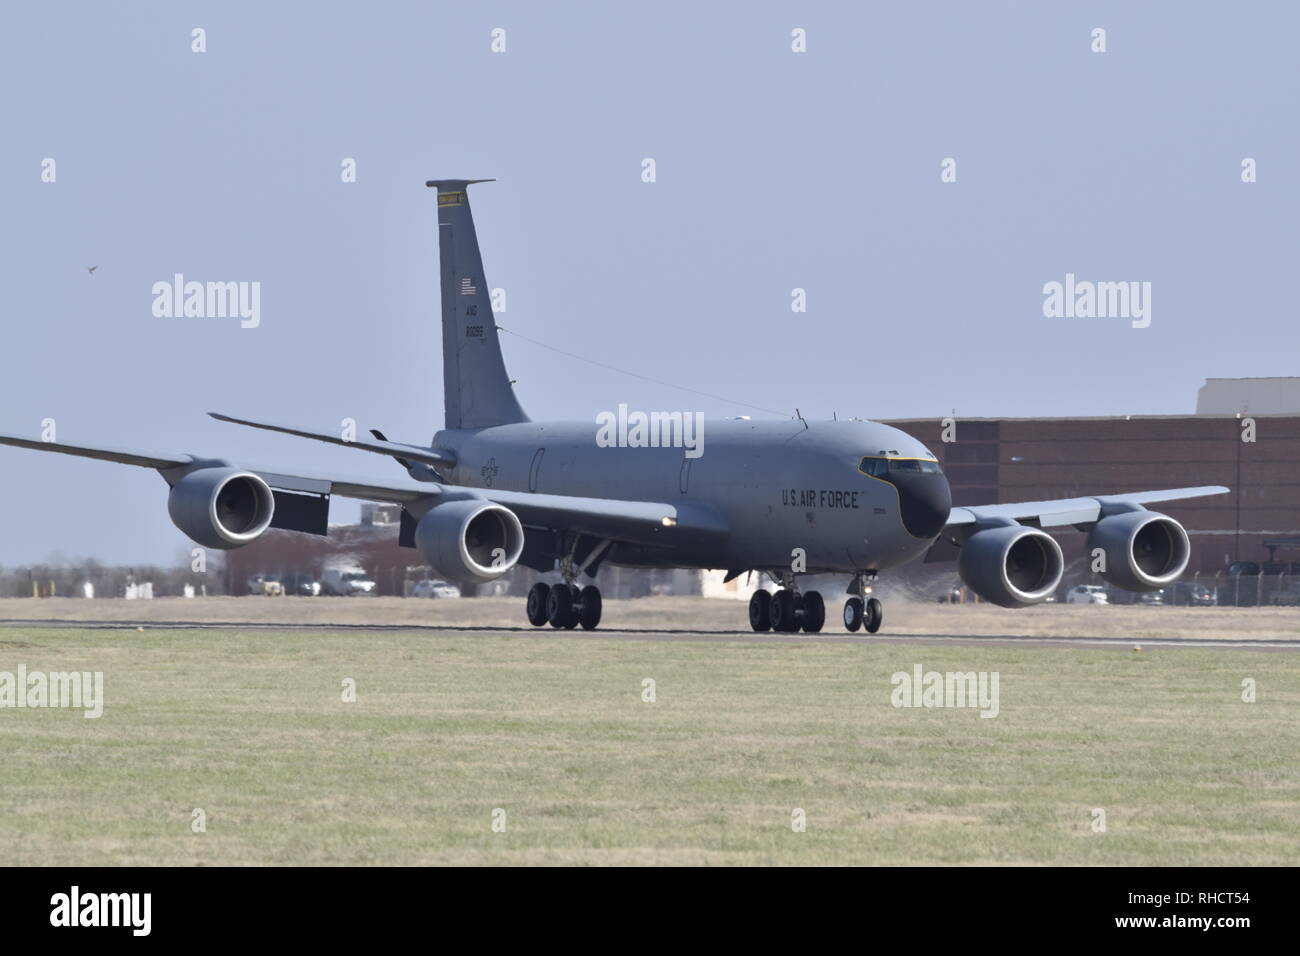 KC-135R Stratotanker, serial # 58-0099, lands at Tinker Air Force Base for induction into the periodic depot maintenance line with the Oklahoma City Air Logistics Center March 9, 2017, Tinker Air Force Base, Oklahoma. The aircraft is assigned to the 171st Air Refueling Wing, Pennsylvania Air National Guard, and was delivered to OC-ALC for maintenance, repair and overhaul. (U.S. Air Force photo/Greg L. Davis) Stock Photo